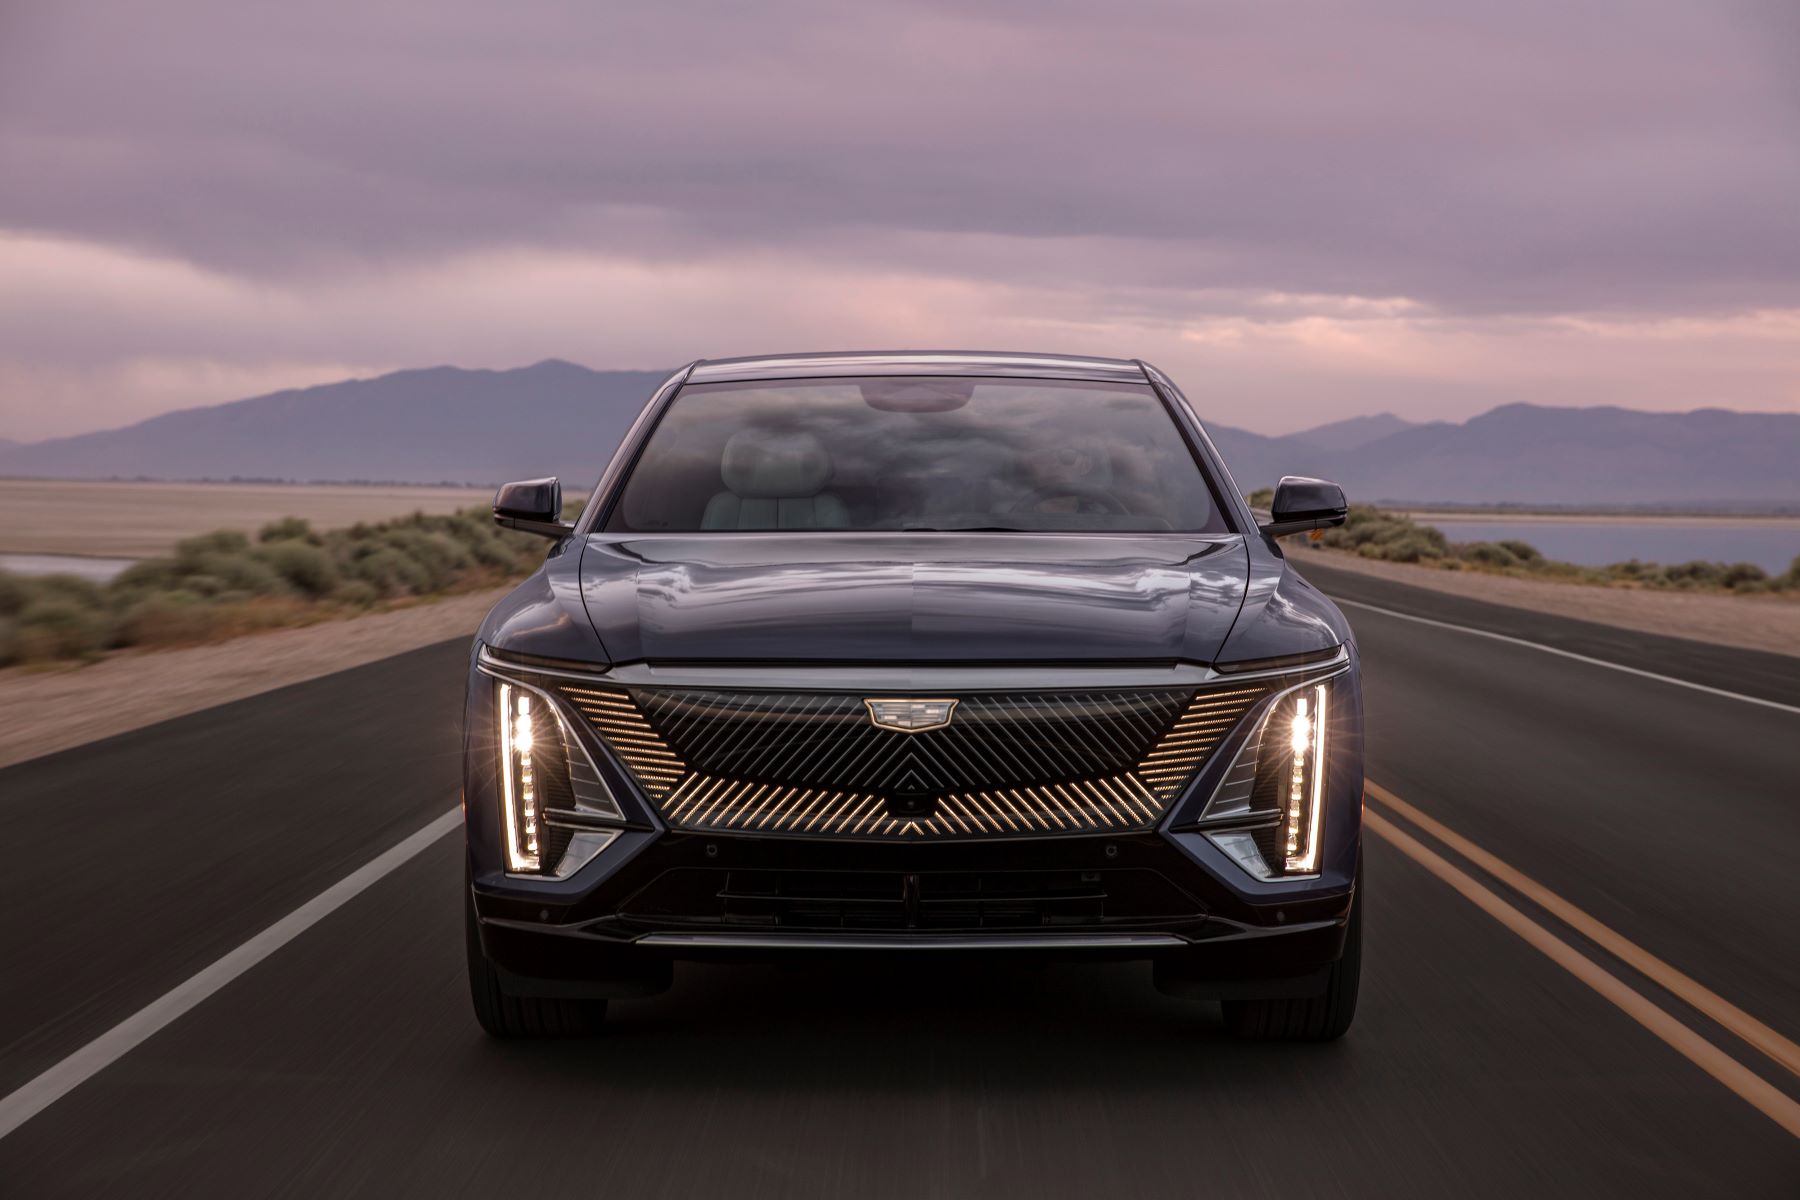 The grille and headlight configuration of a 2023 Cadillac Lyriq all-electric (EV) luxury SUV model on a highway